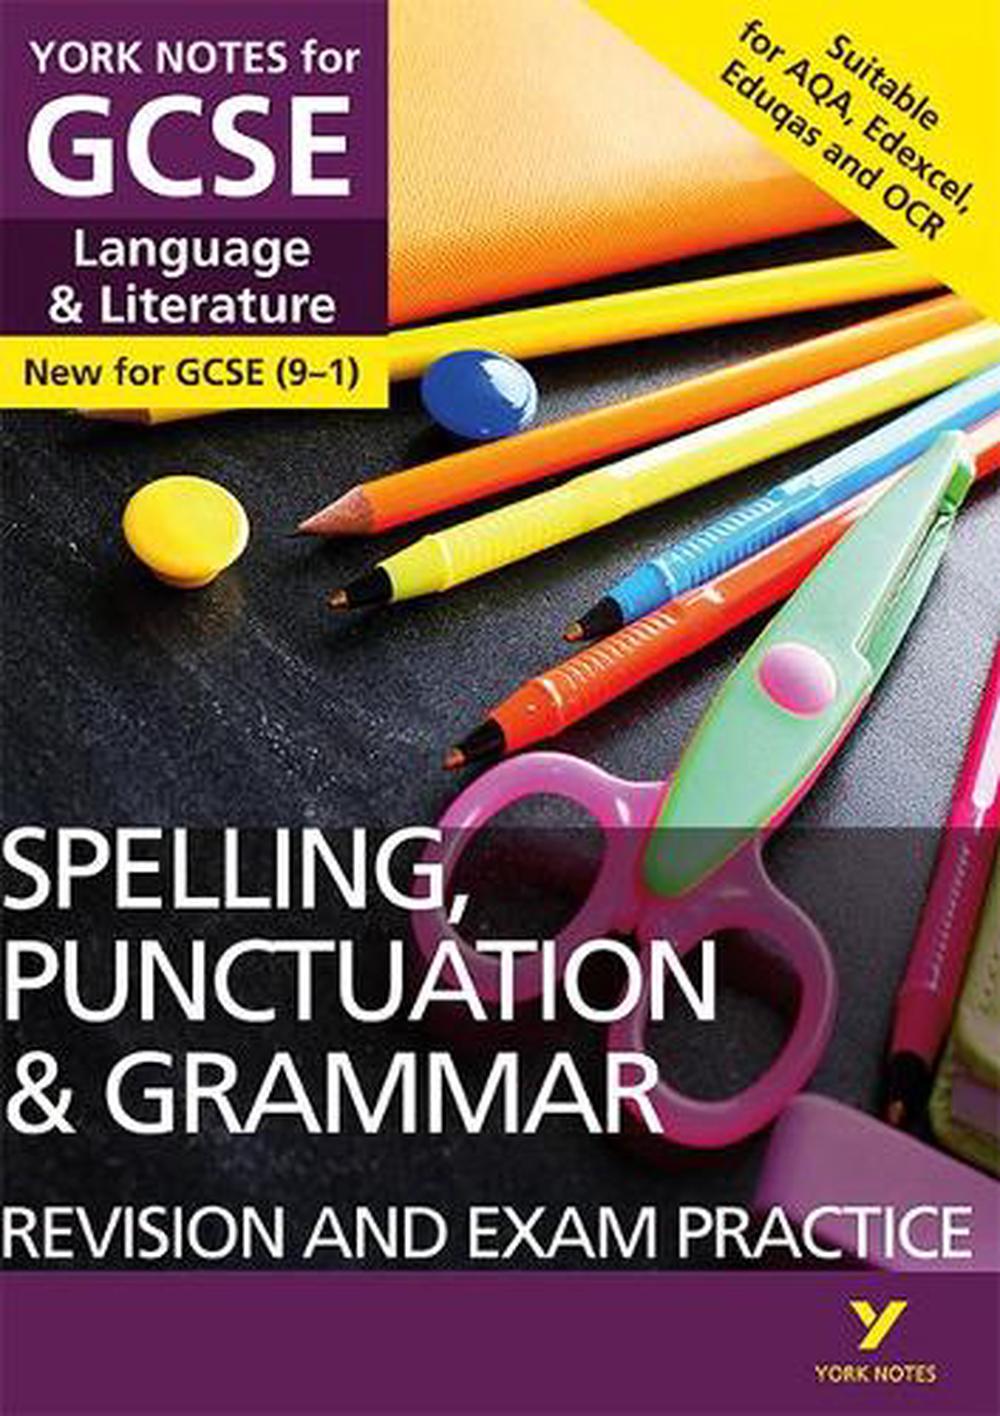 York Notes For Gcse 9 1 Spelling Punctuation And Grammar Revision And Exam Practice Guide Everything You Need To Catch Up Study And Prepare For 21 Assessments And 22 Exams By Elizabeth